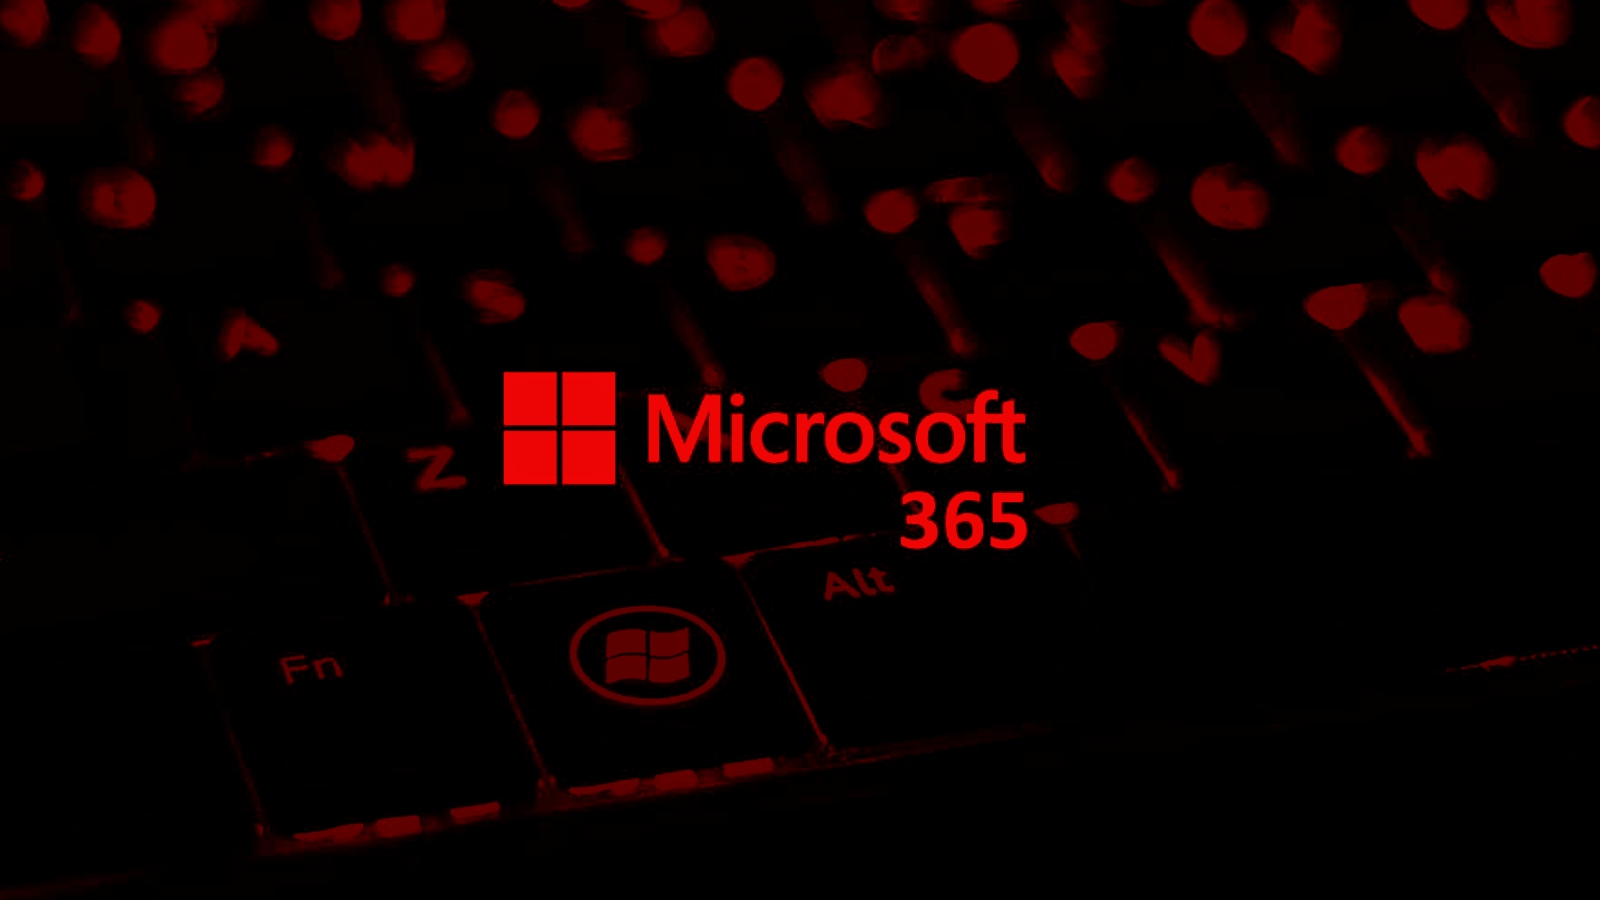 Microsoft warns of multi-stage phishing campaign leveraging Azure AD